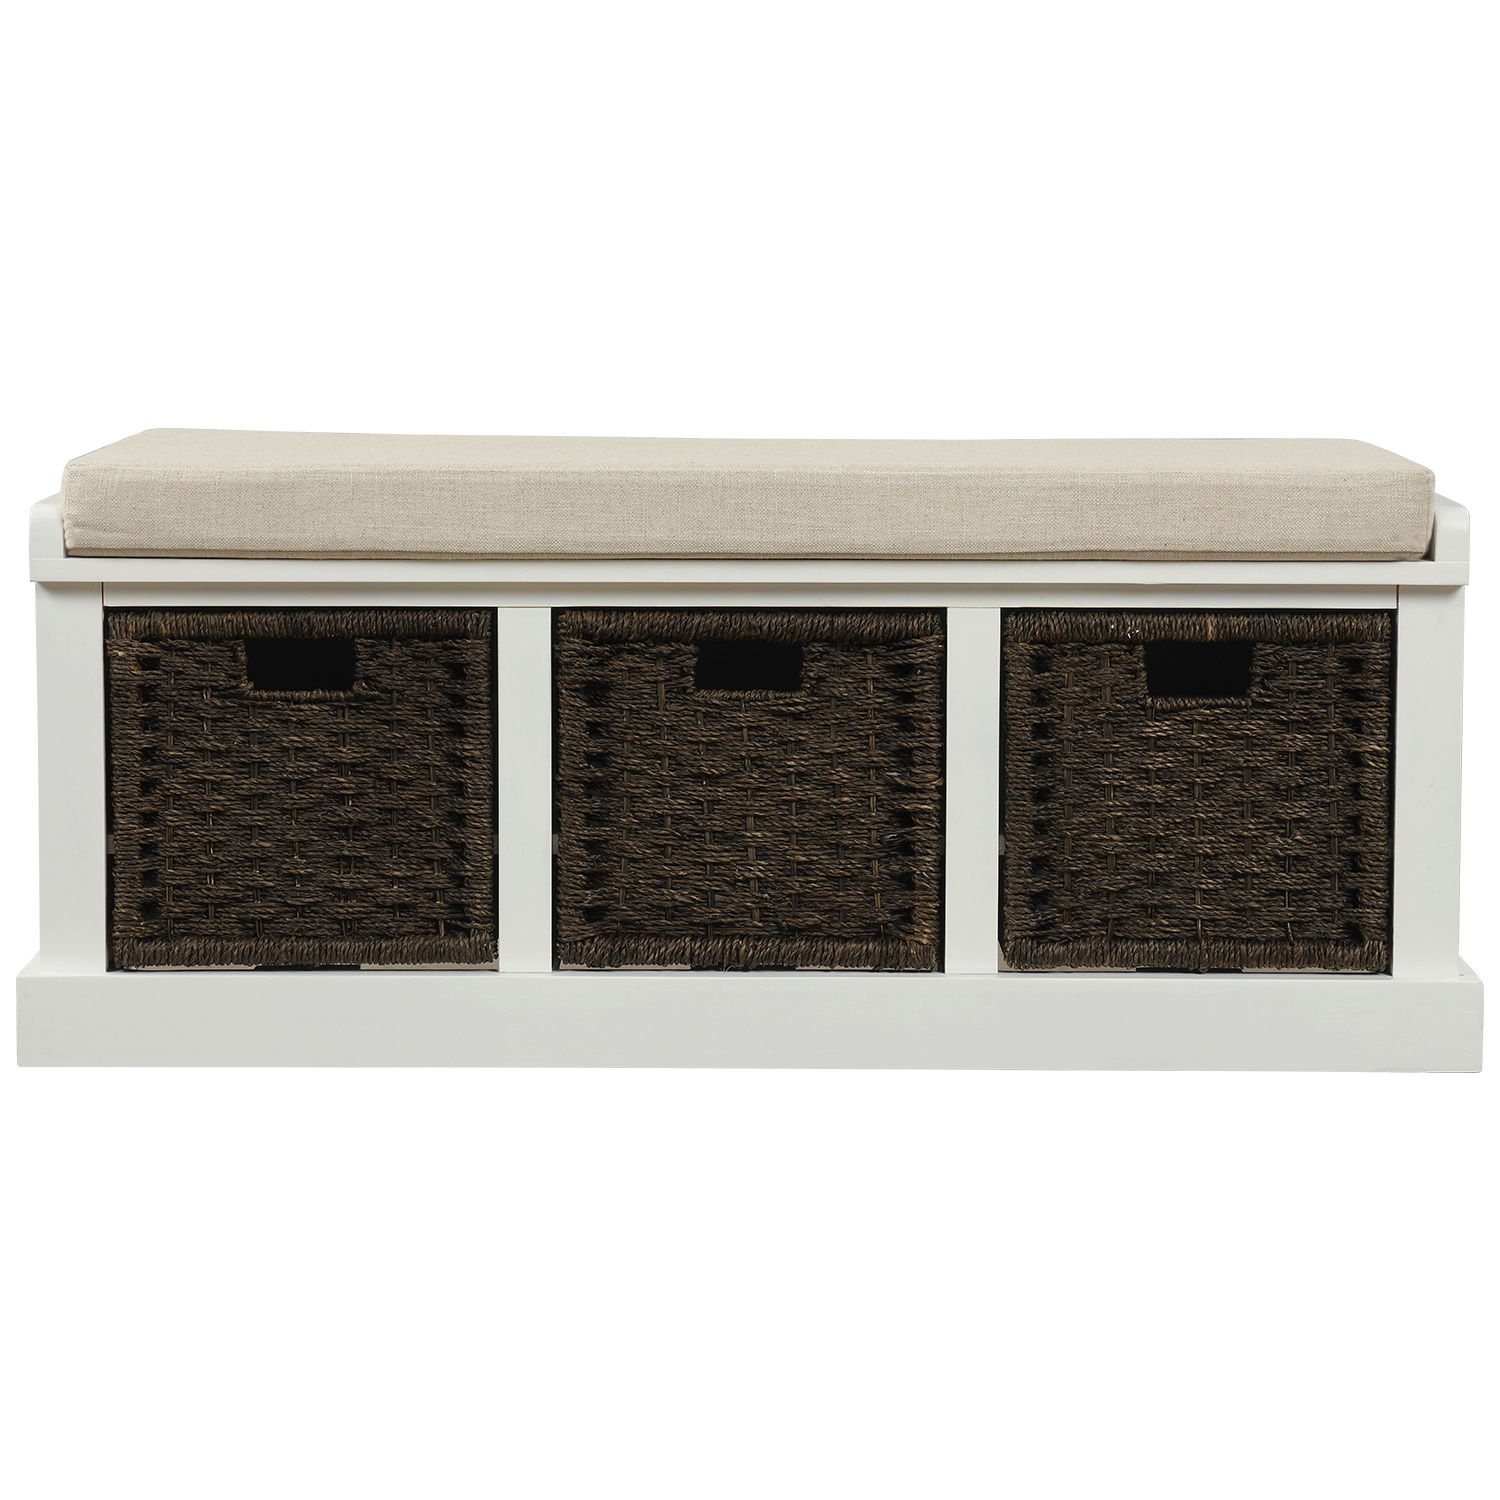 Rustic Storage Bench With 3 Removable Classic Rattan Basket - WF193443AAK